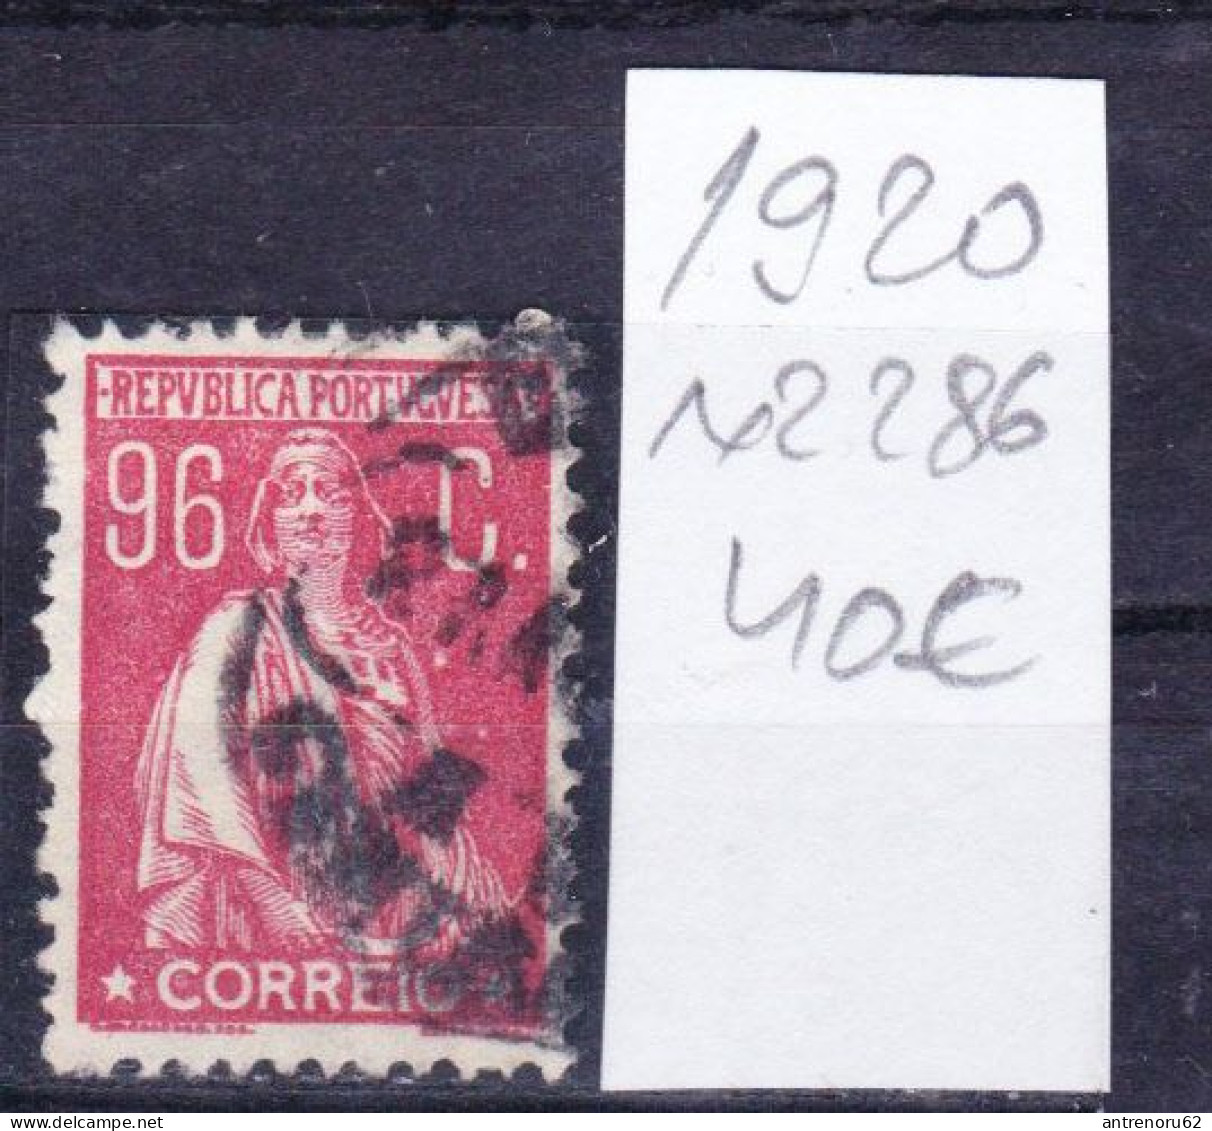 STAMPS-PORTUGAL-1920-USED-SEE-SCAN - Oblitérés